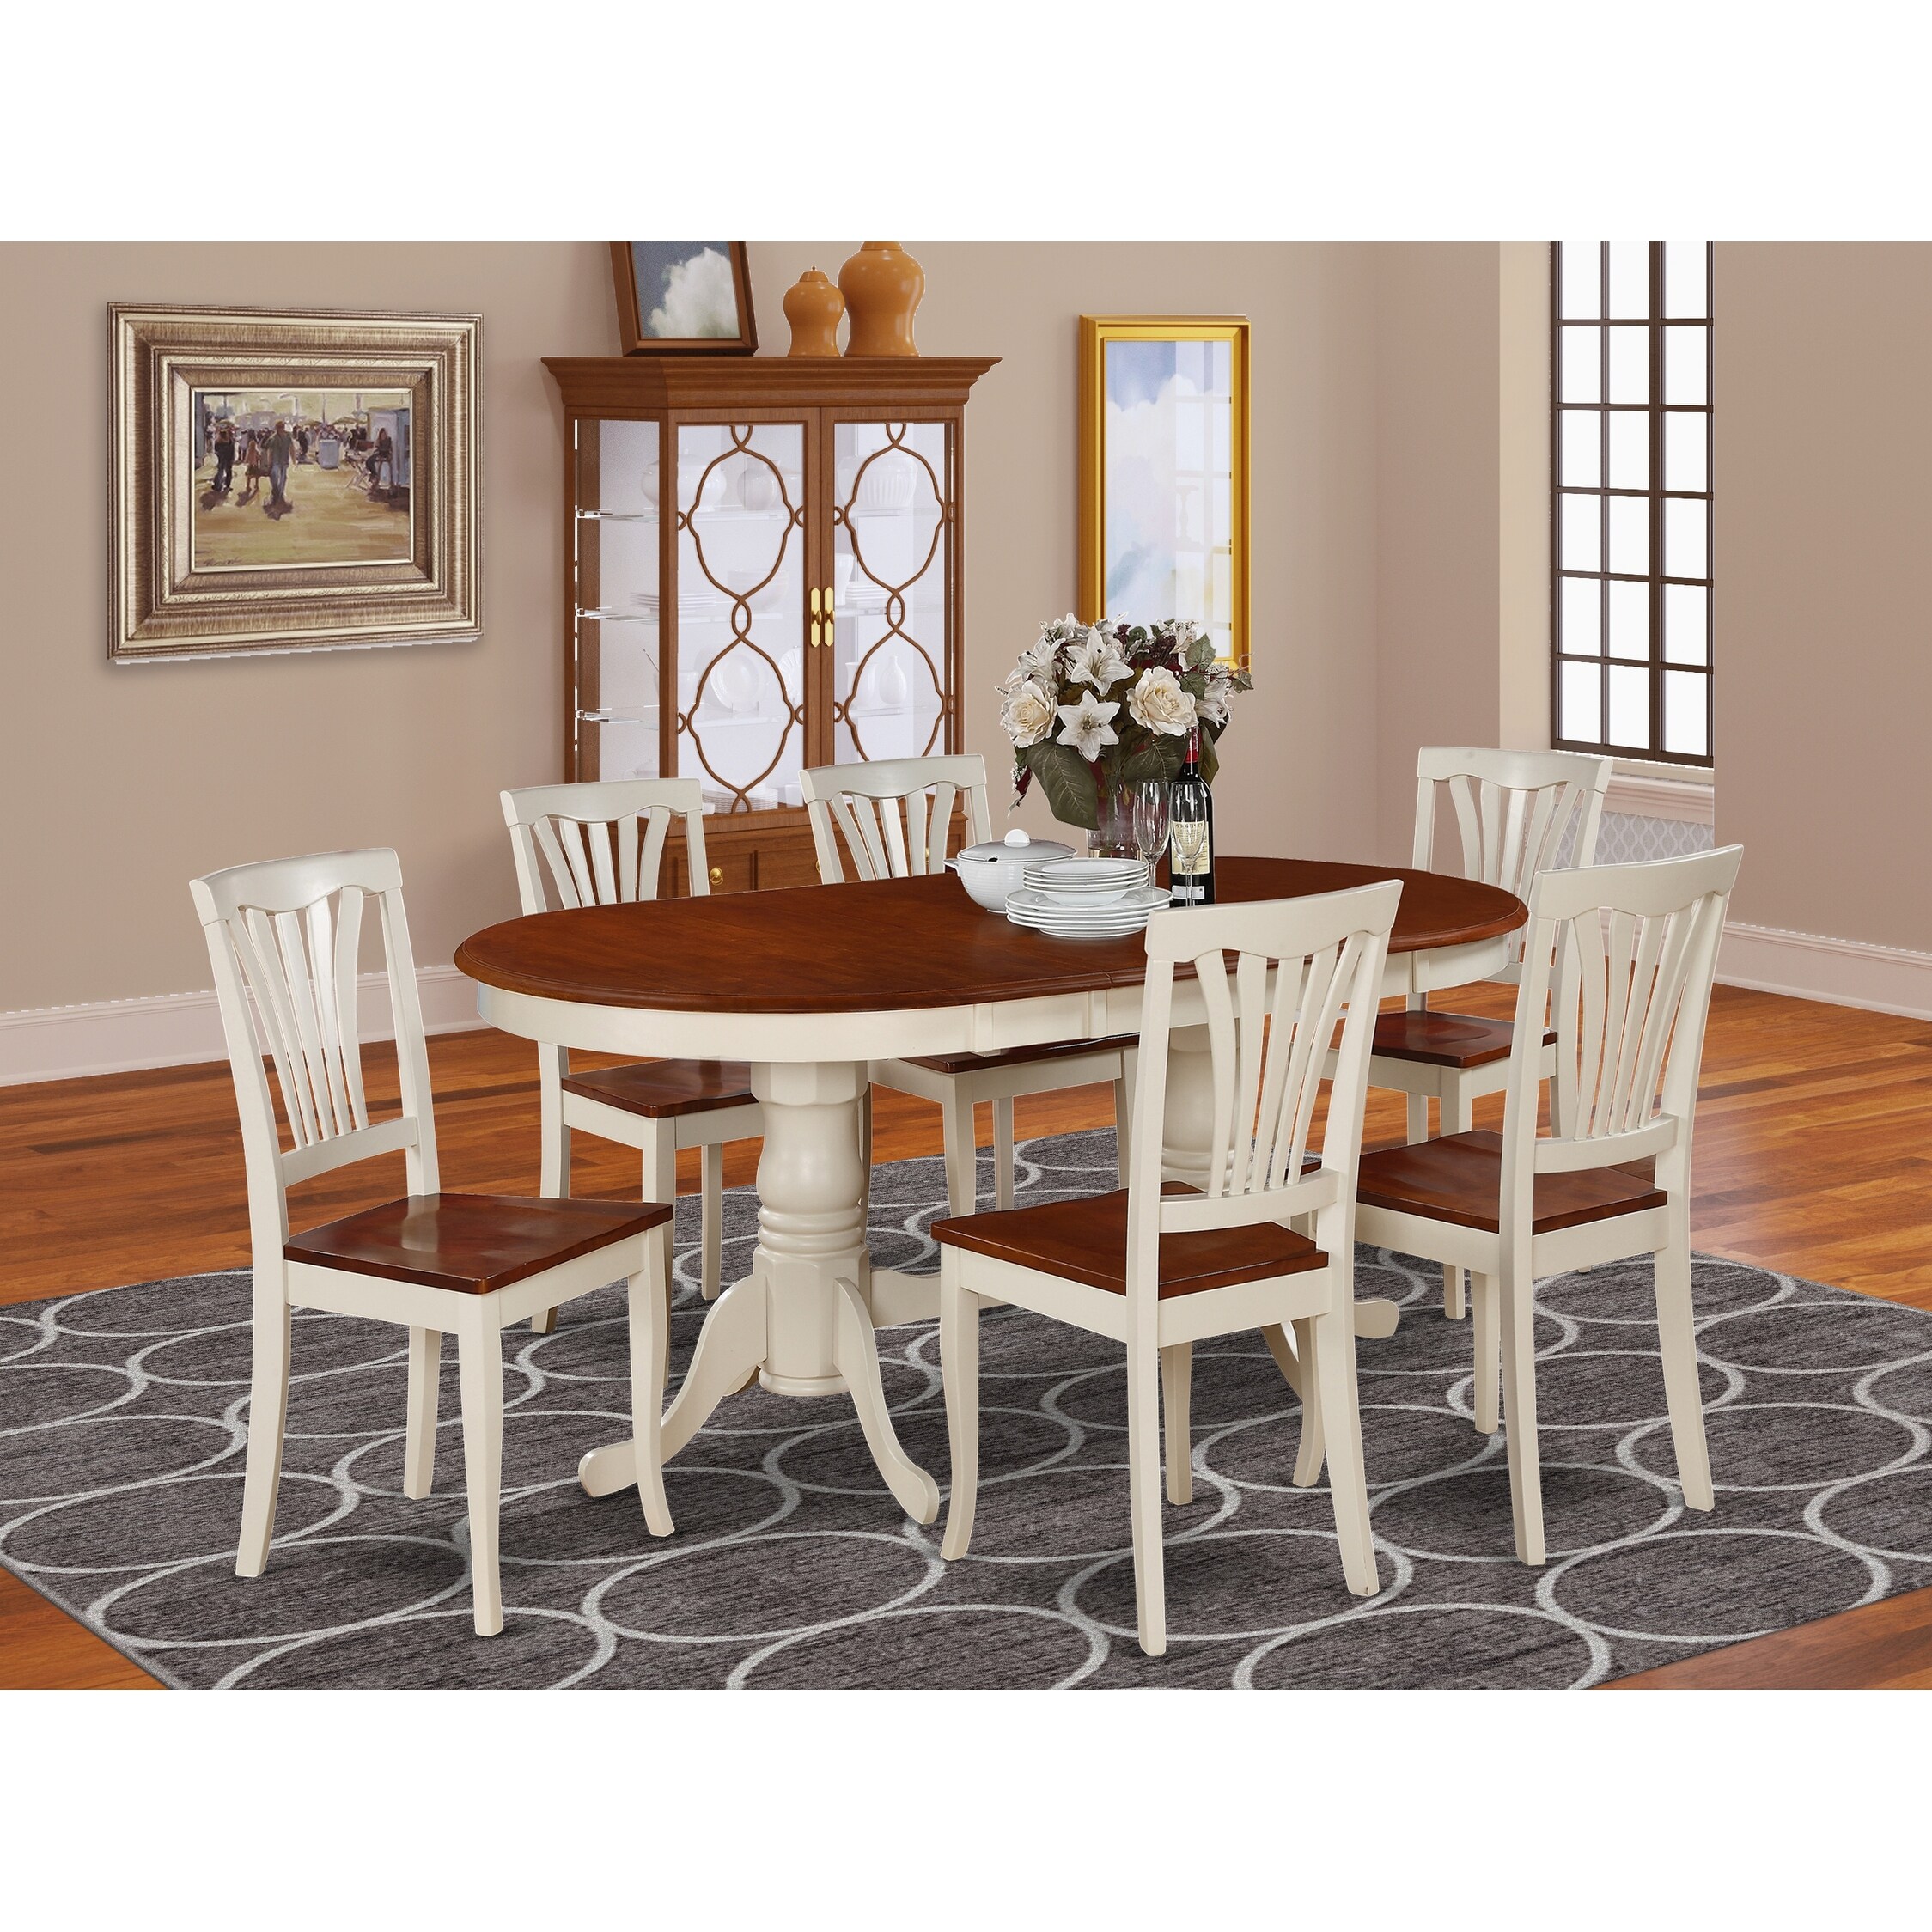 Rubberwood 7-piece Dining Room Set Includes Wooden Table and Kitchen Dining  Chairs Buttermilk and Cherry Finish On Sale Bed Bath  Beyond  12027327